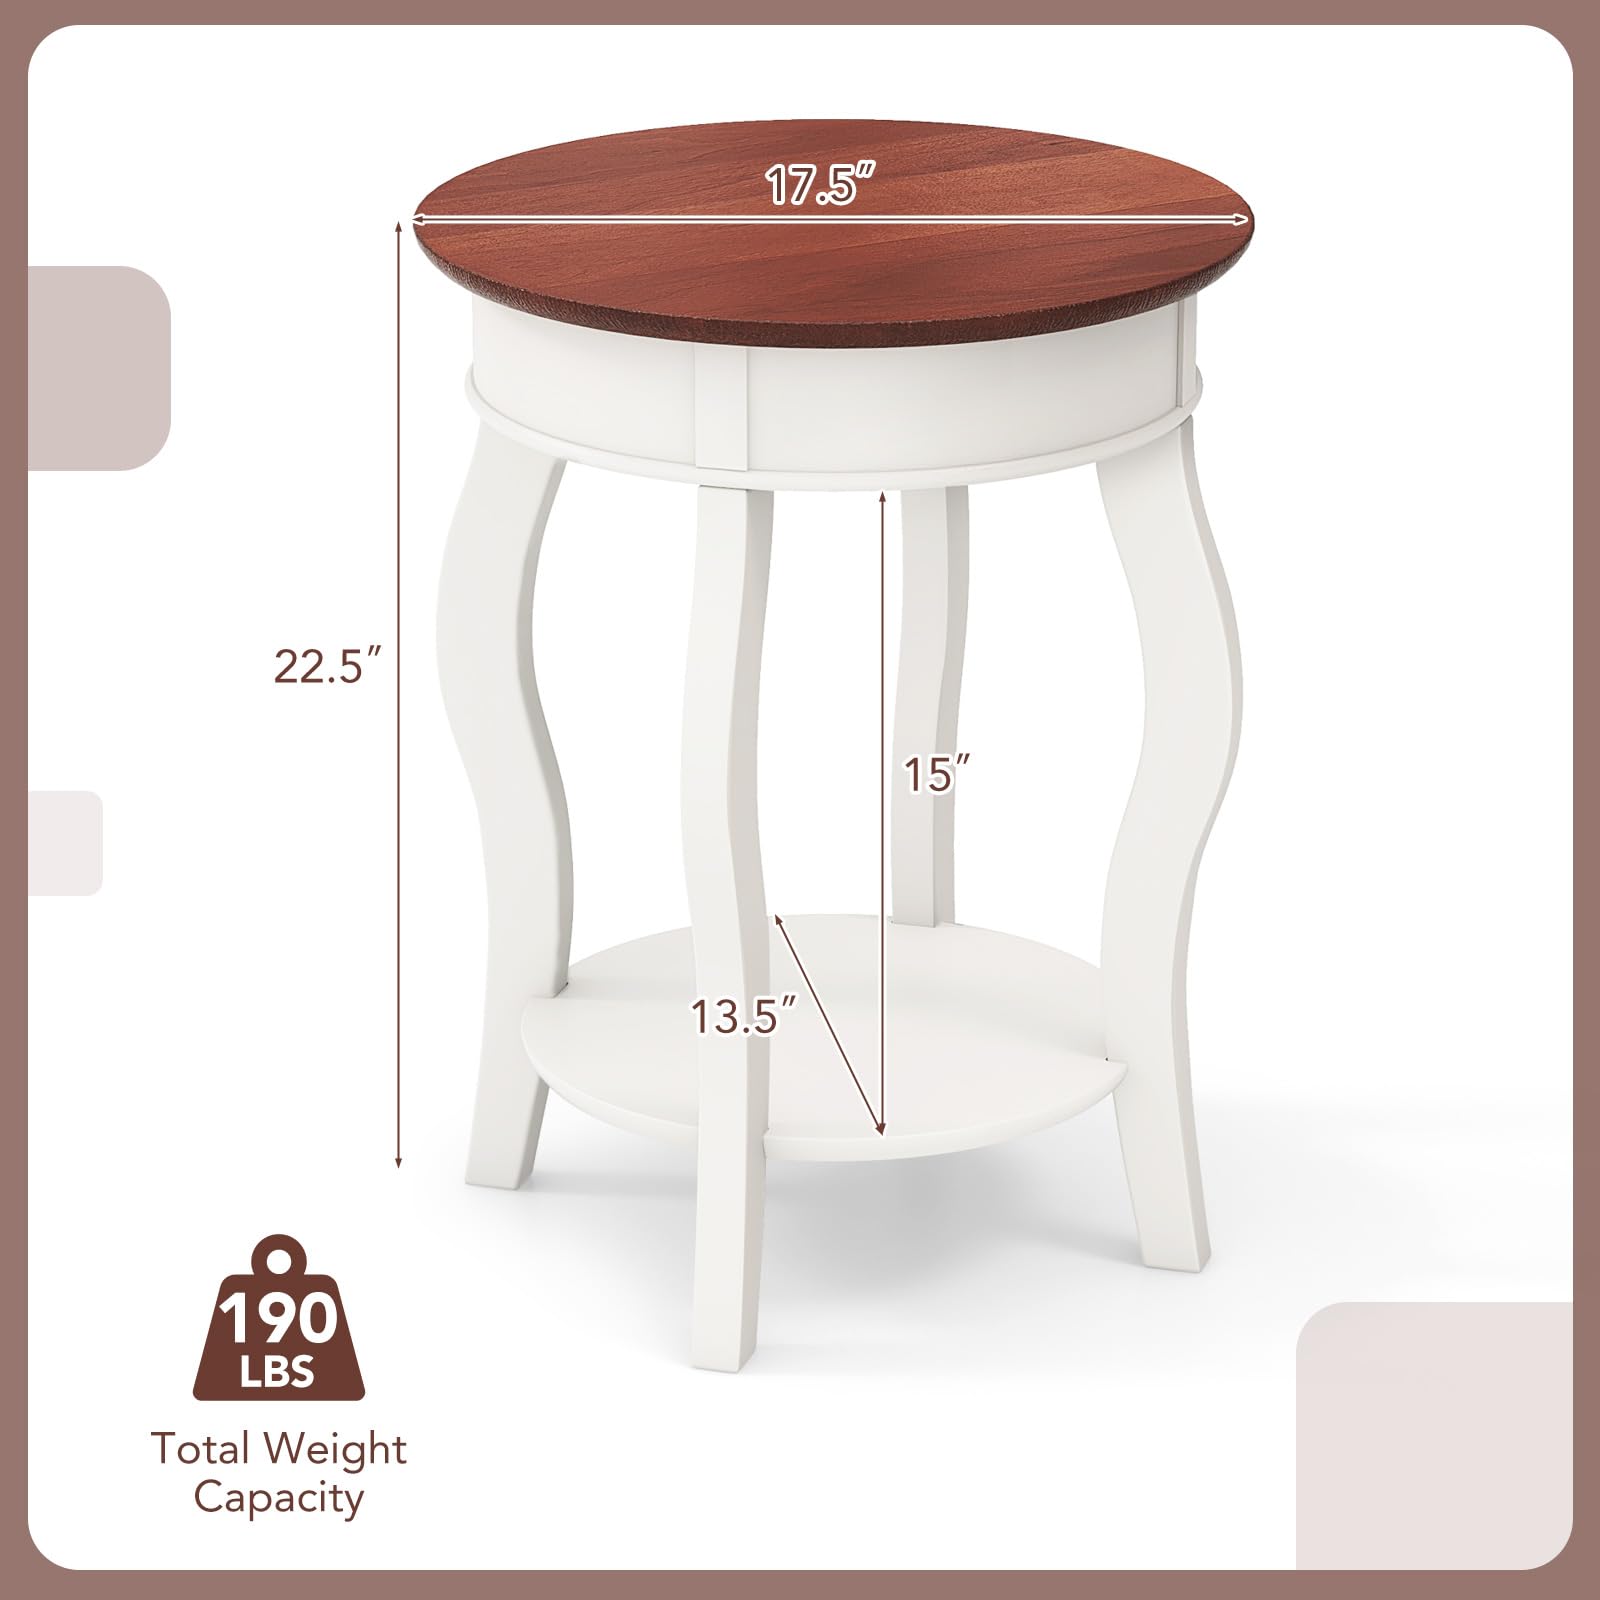 Giantex Farmhouse Round End Table, 2-Tier Sofa Side Table with Storage Shelf, Small Wooden Tea Table with Solid Rubber Wood Legs